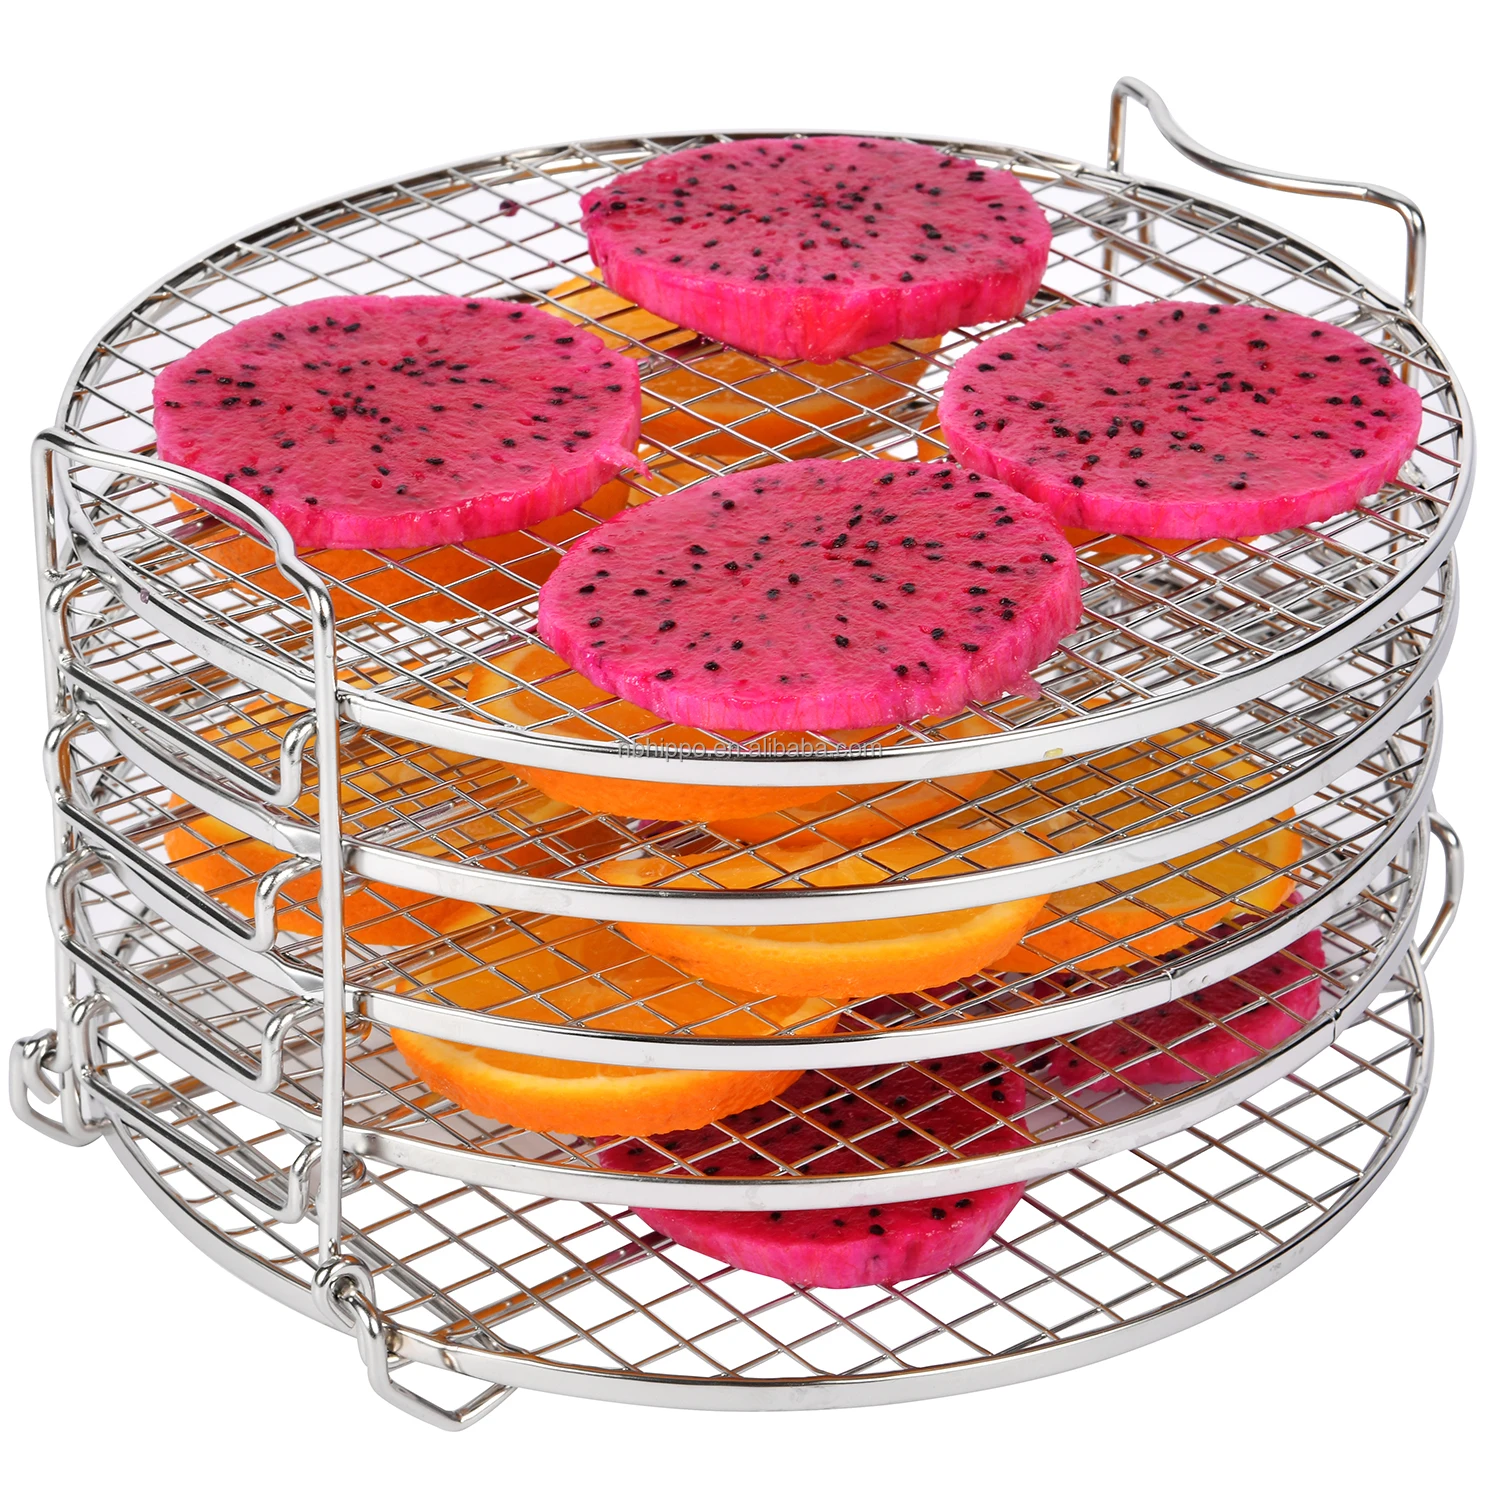 
spare parts for blender Stainless Steel 5 tiers Stackable rach dehydrator rack 